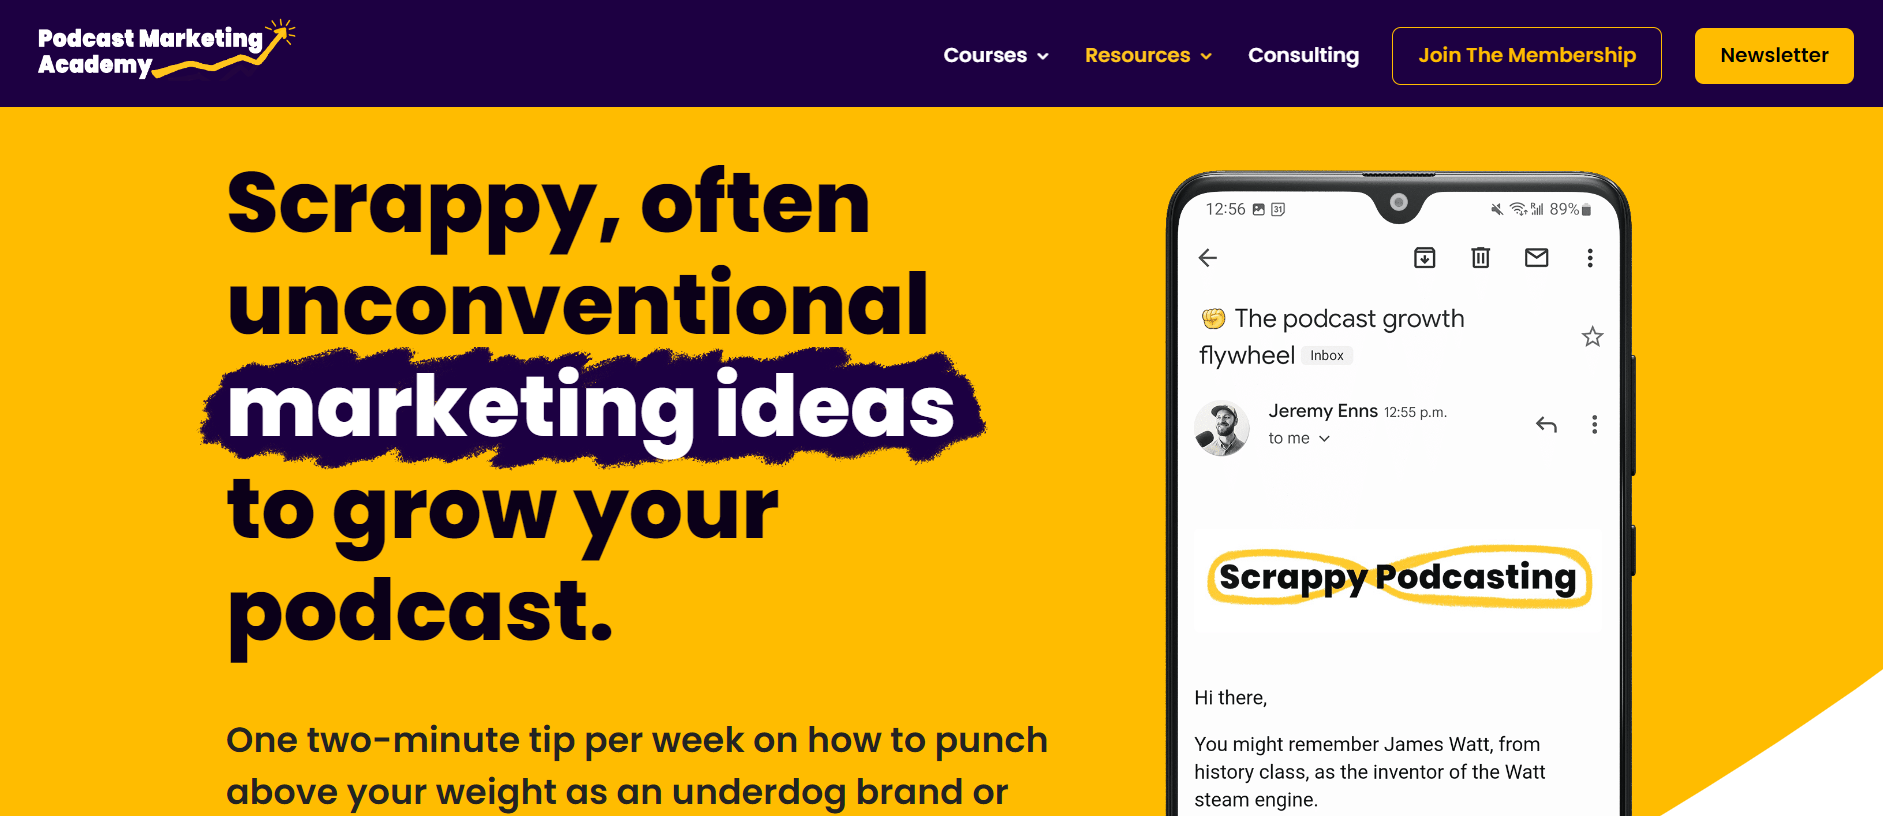 Scrappy Podcasting newsletter